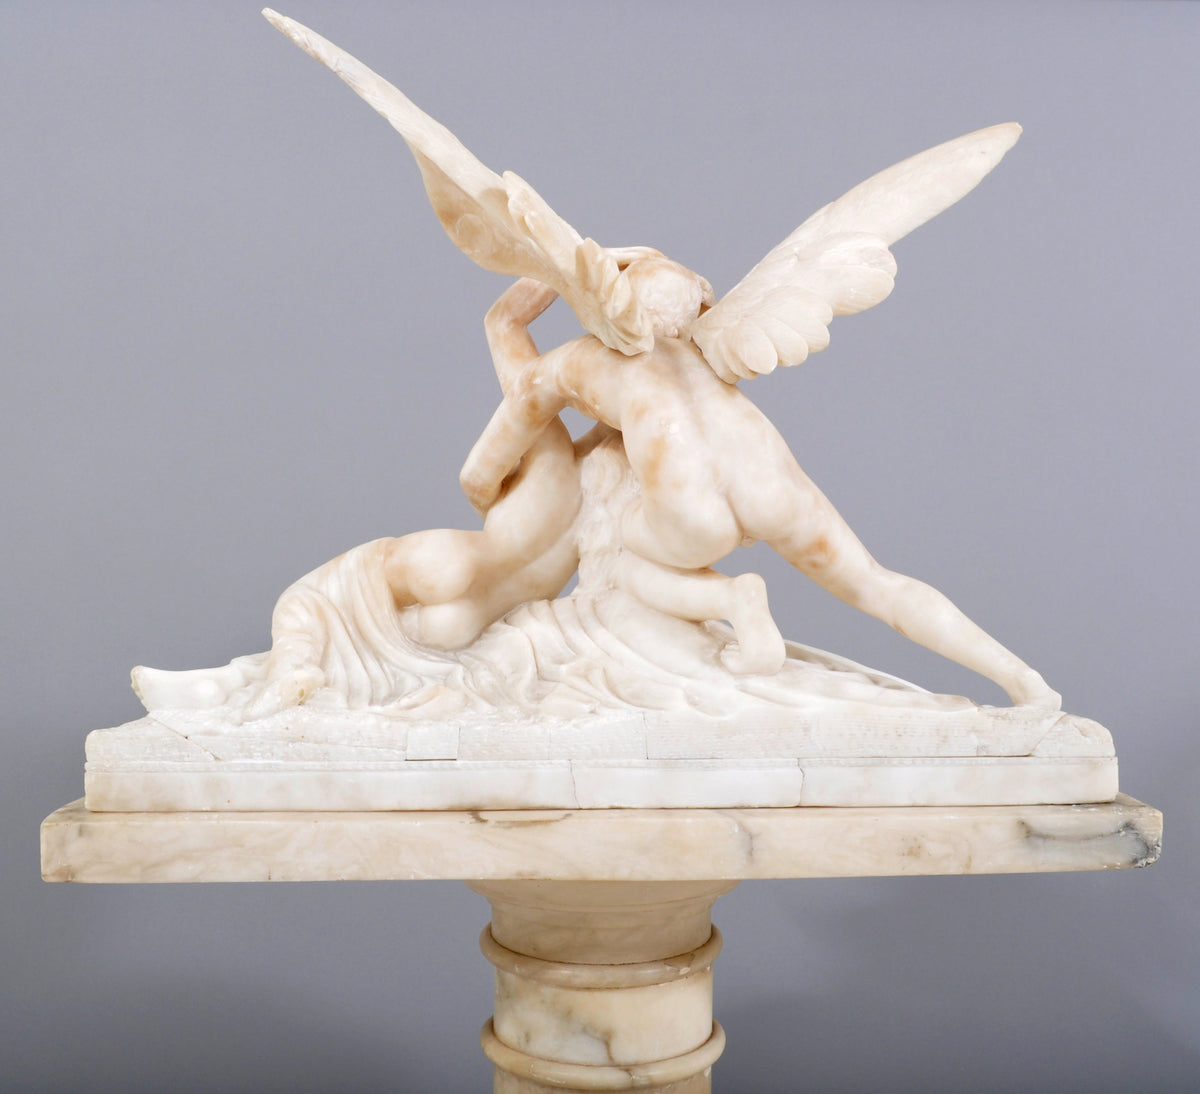 Antique Italian 'Grande Tour' Marble and Alabaster Statue, "Cupid and Psyche," after Canova, Circa 1880